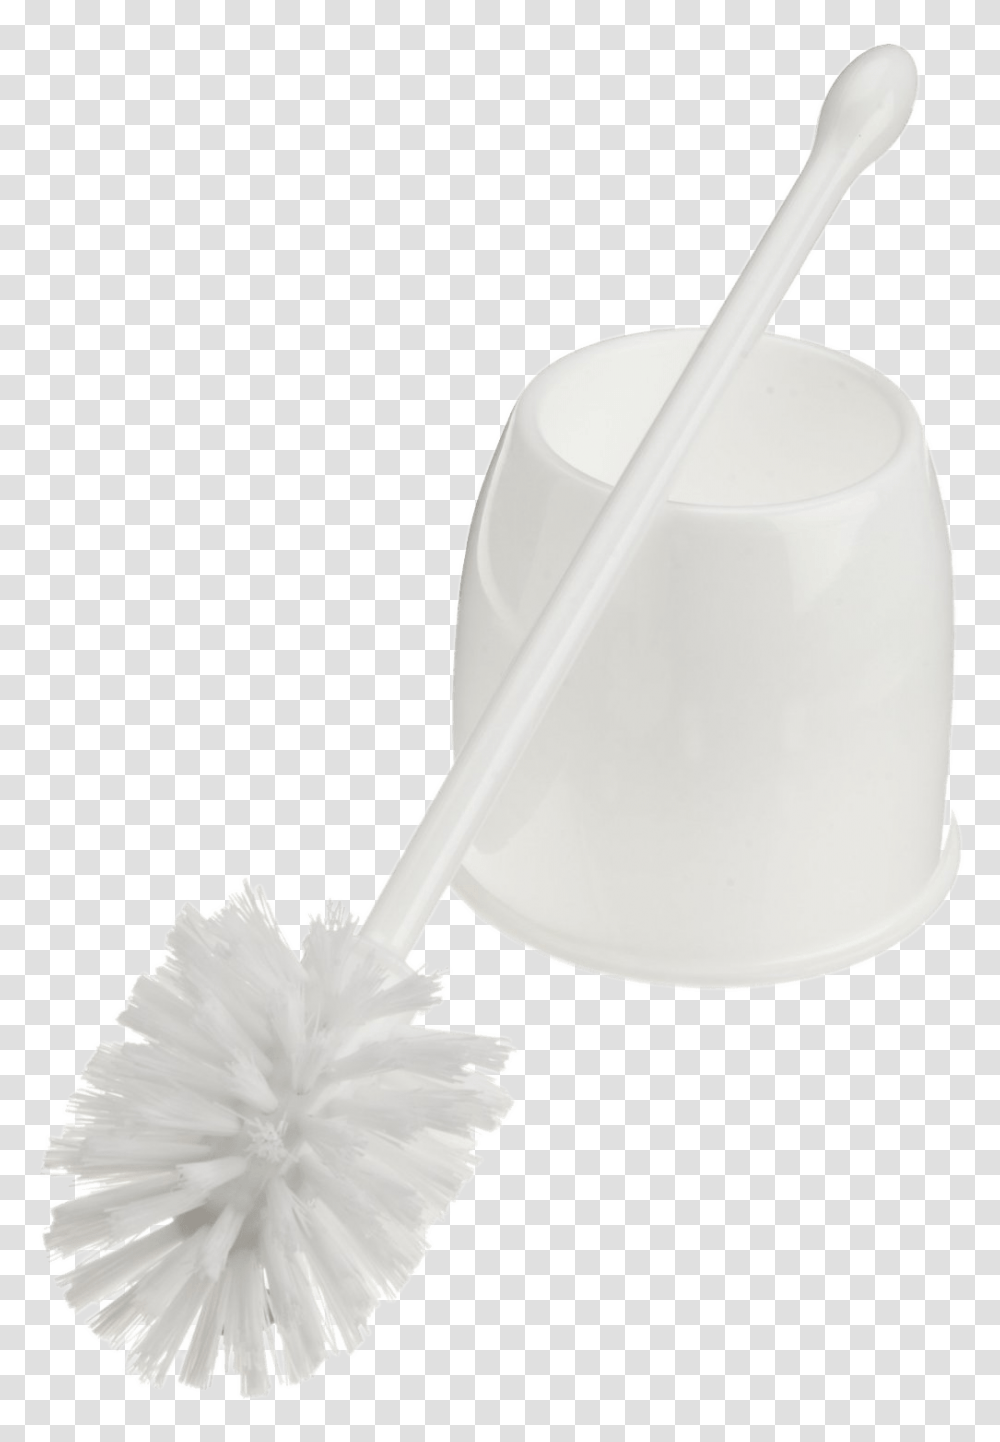 Toilet Brush, Toothbrush, Tool, Spoon, Cutlery Transparent Png